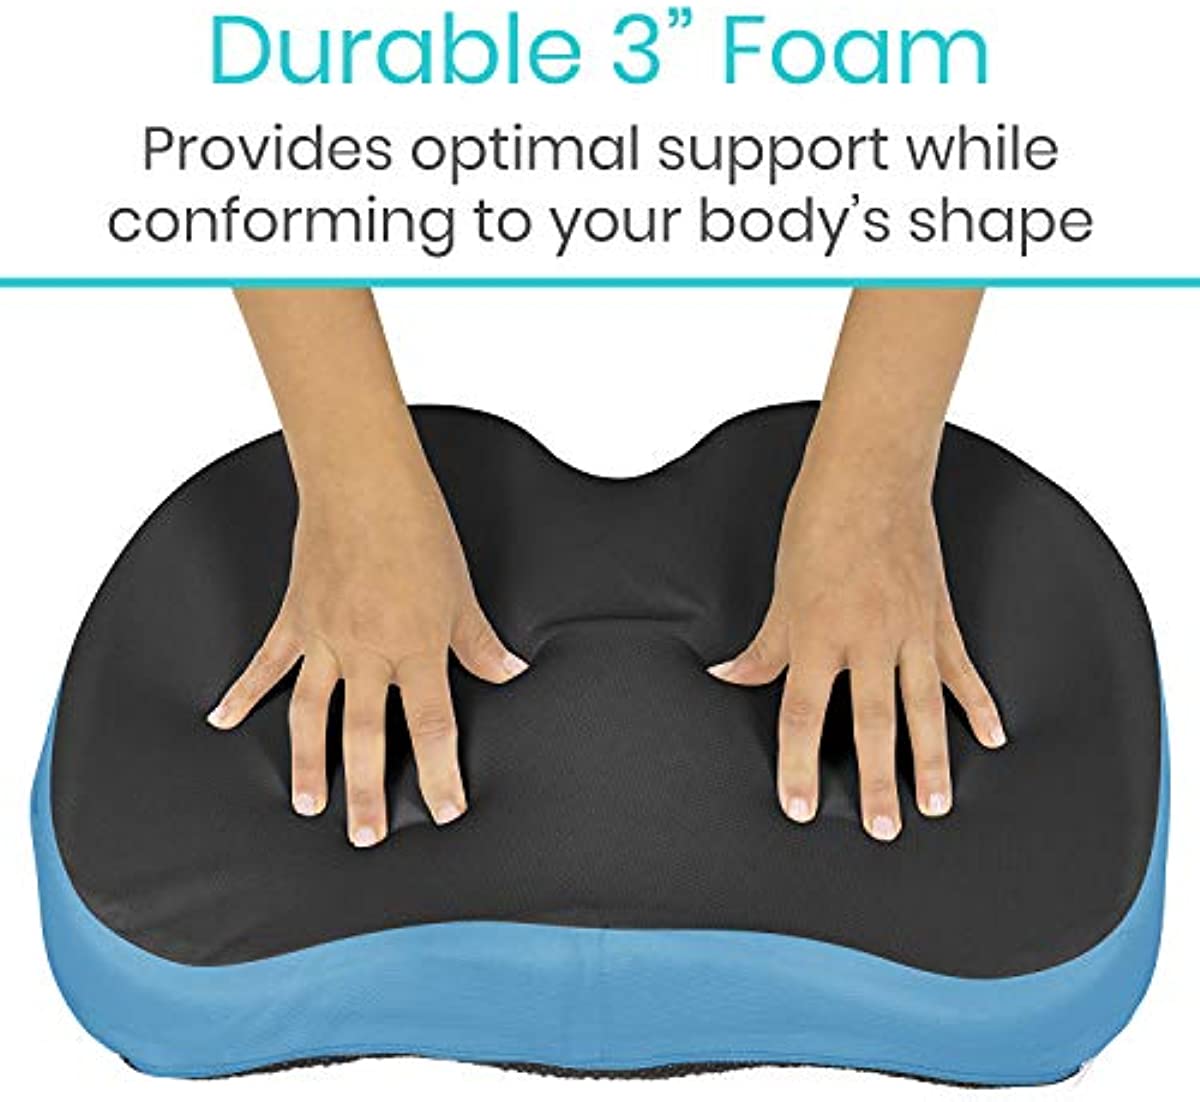 Vive Coccyx Seat Cushion - Orthopedic Foam for Office Chair, Car, Desk and Wheelchair - Tailbone and Lumbar Support Pad - Firm for Sciatica, Lower Back Pain Relief - Includes Soft Cover